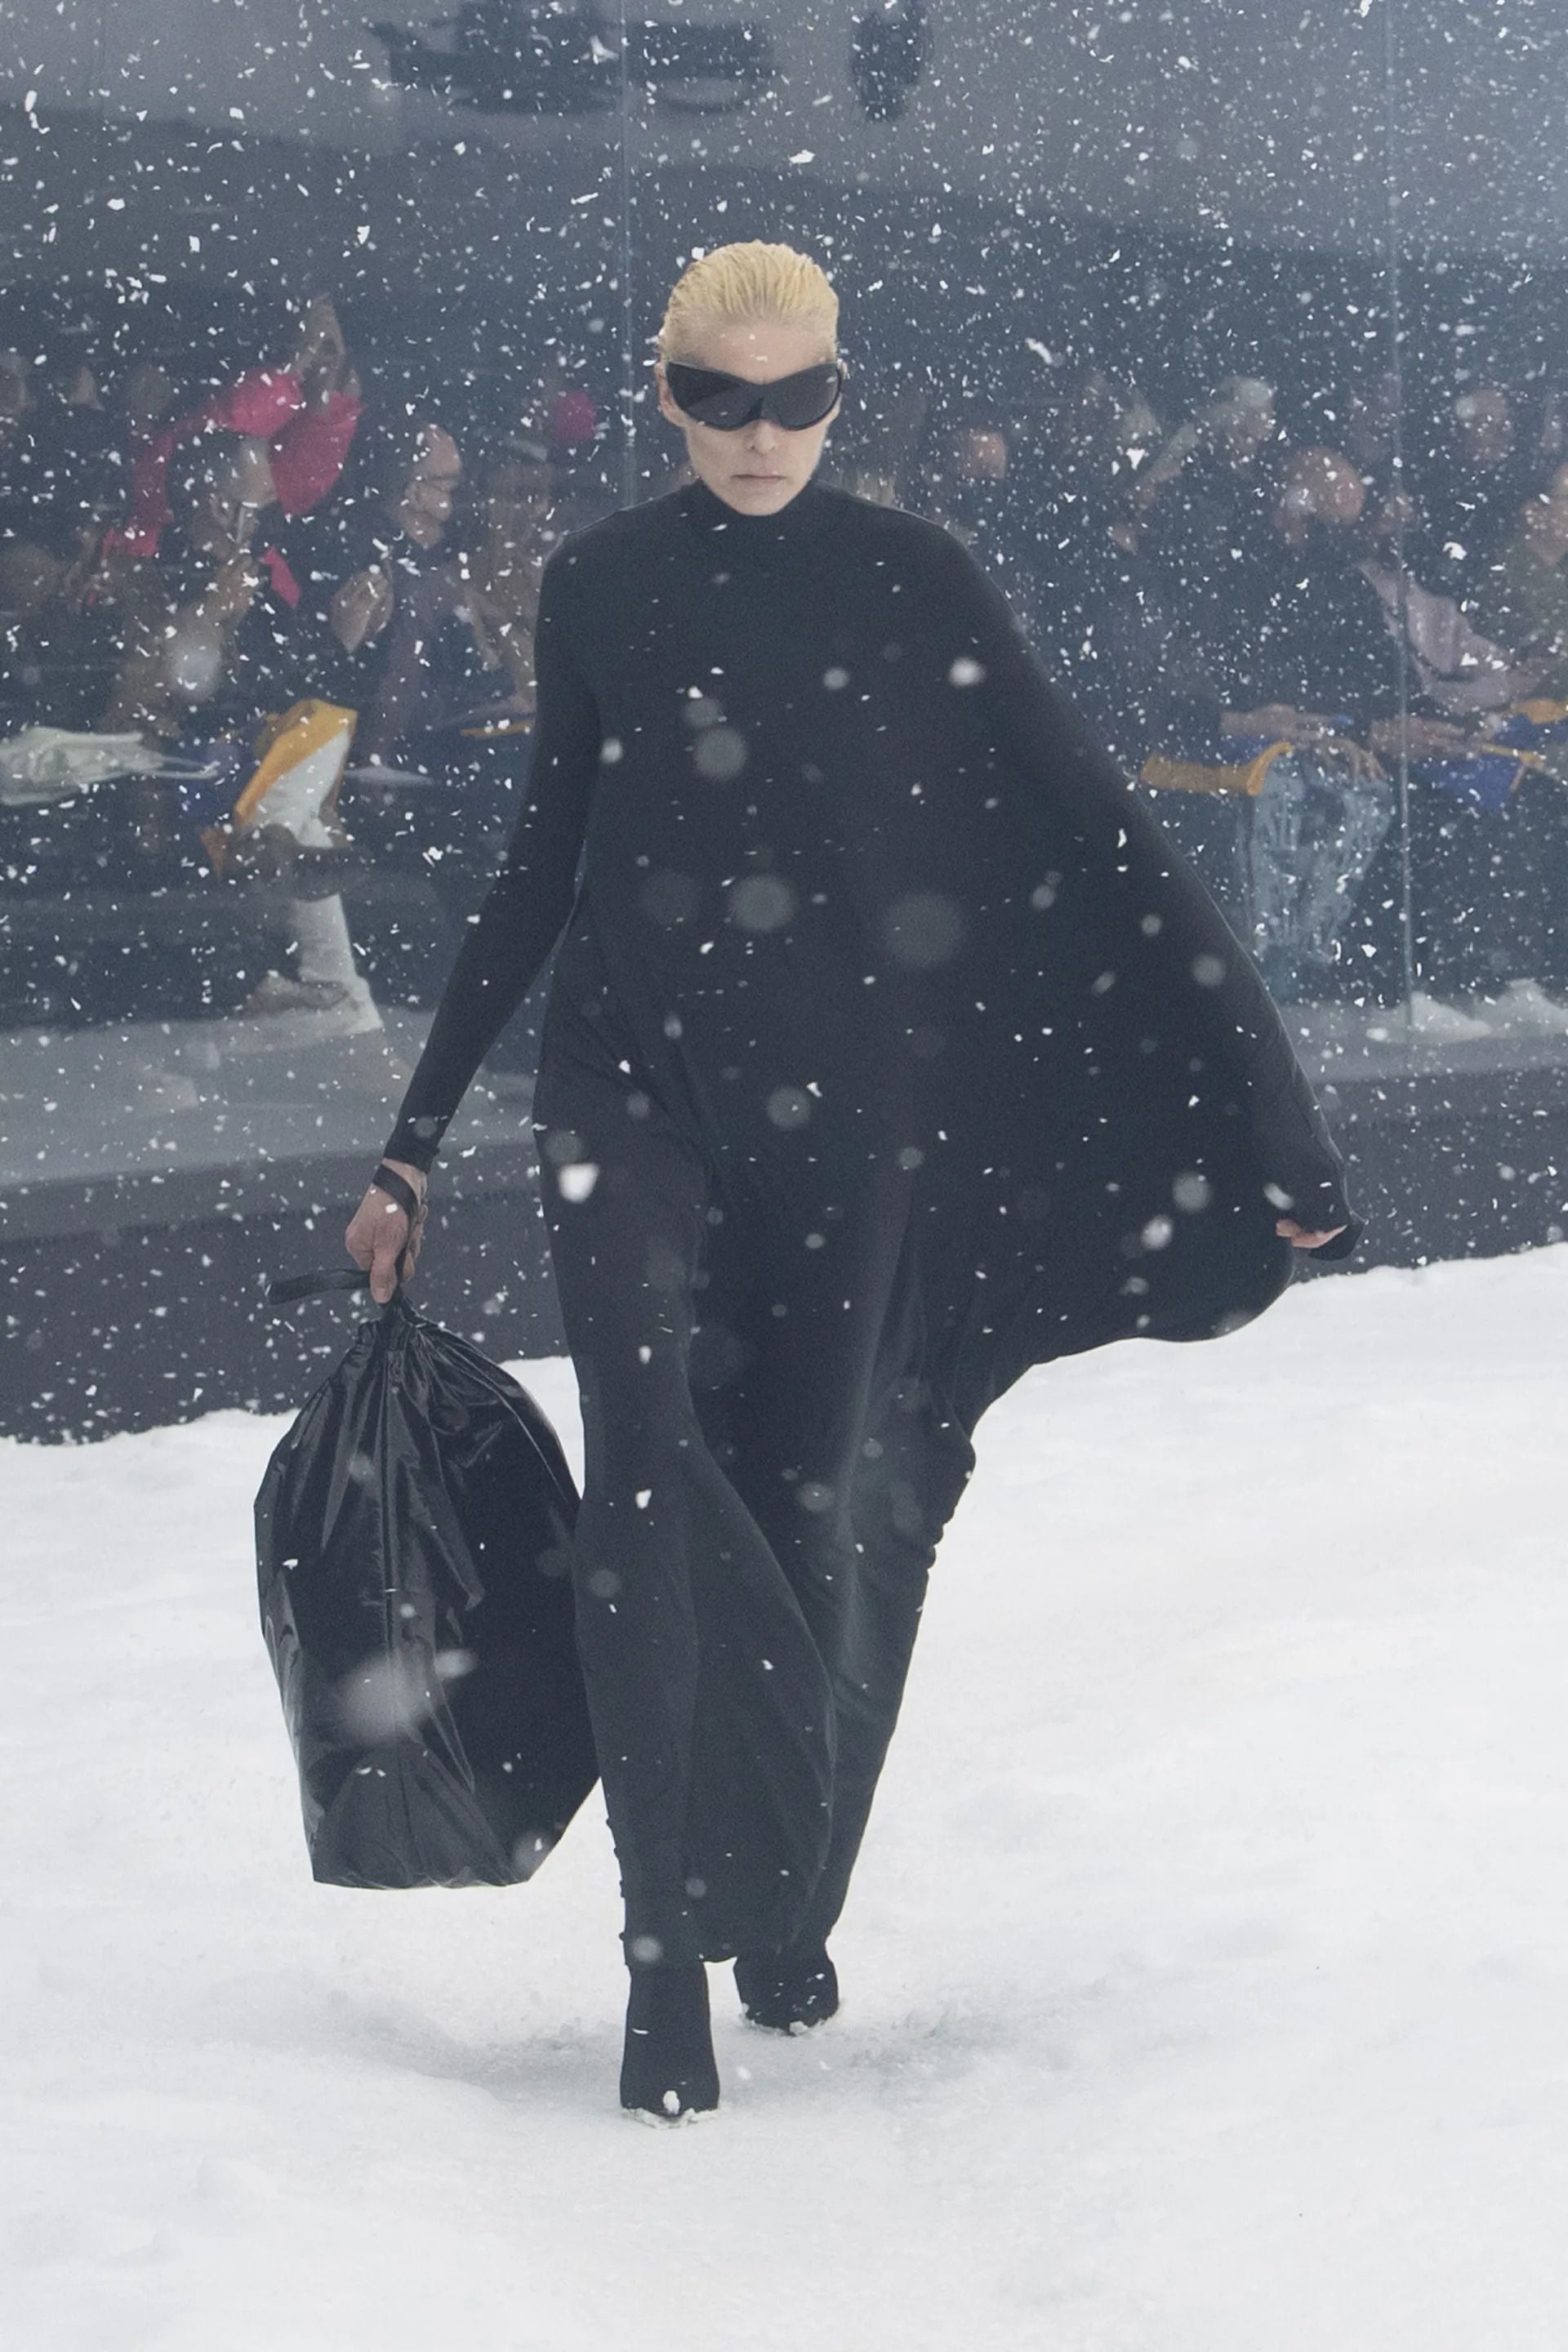 Balenciaga Releases The Most Expensive Garbage Bag In the World